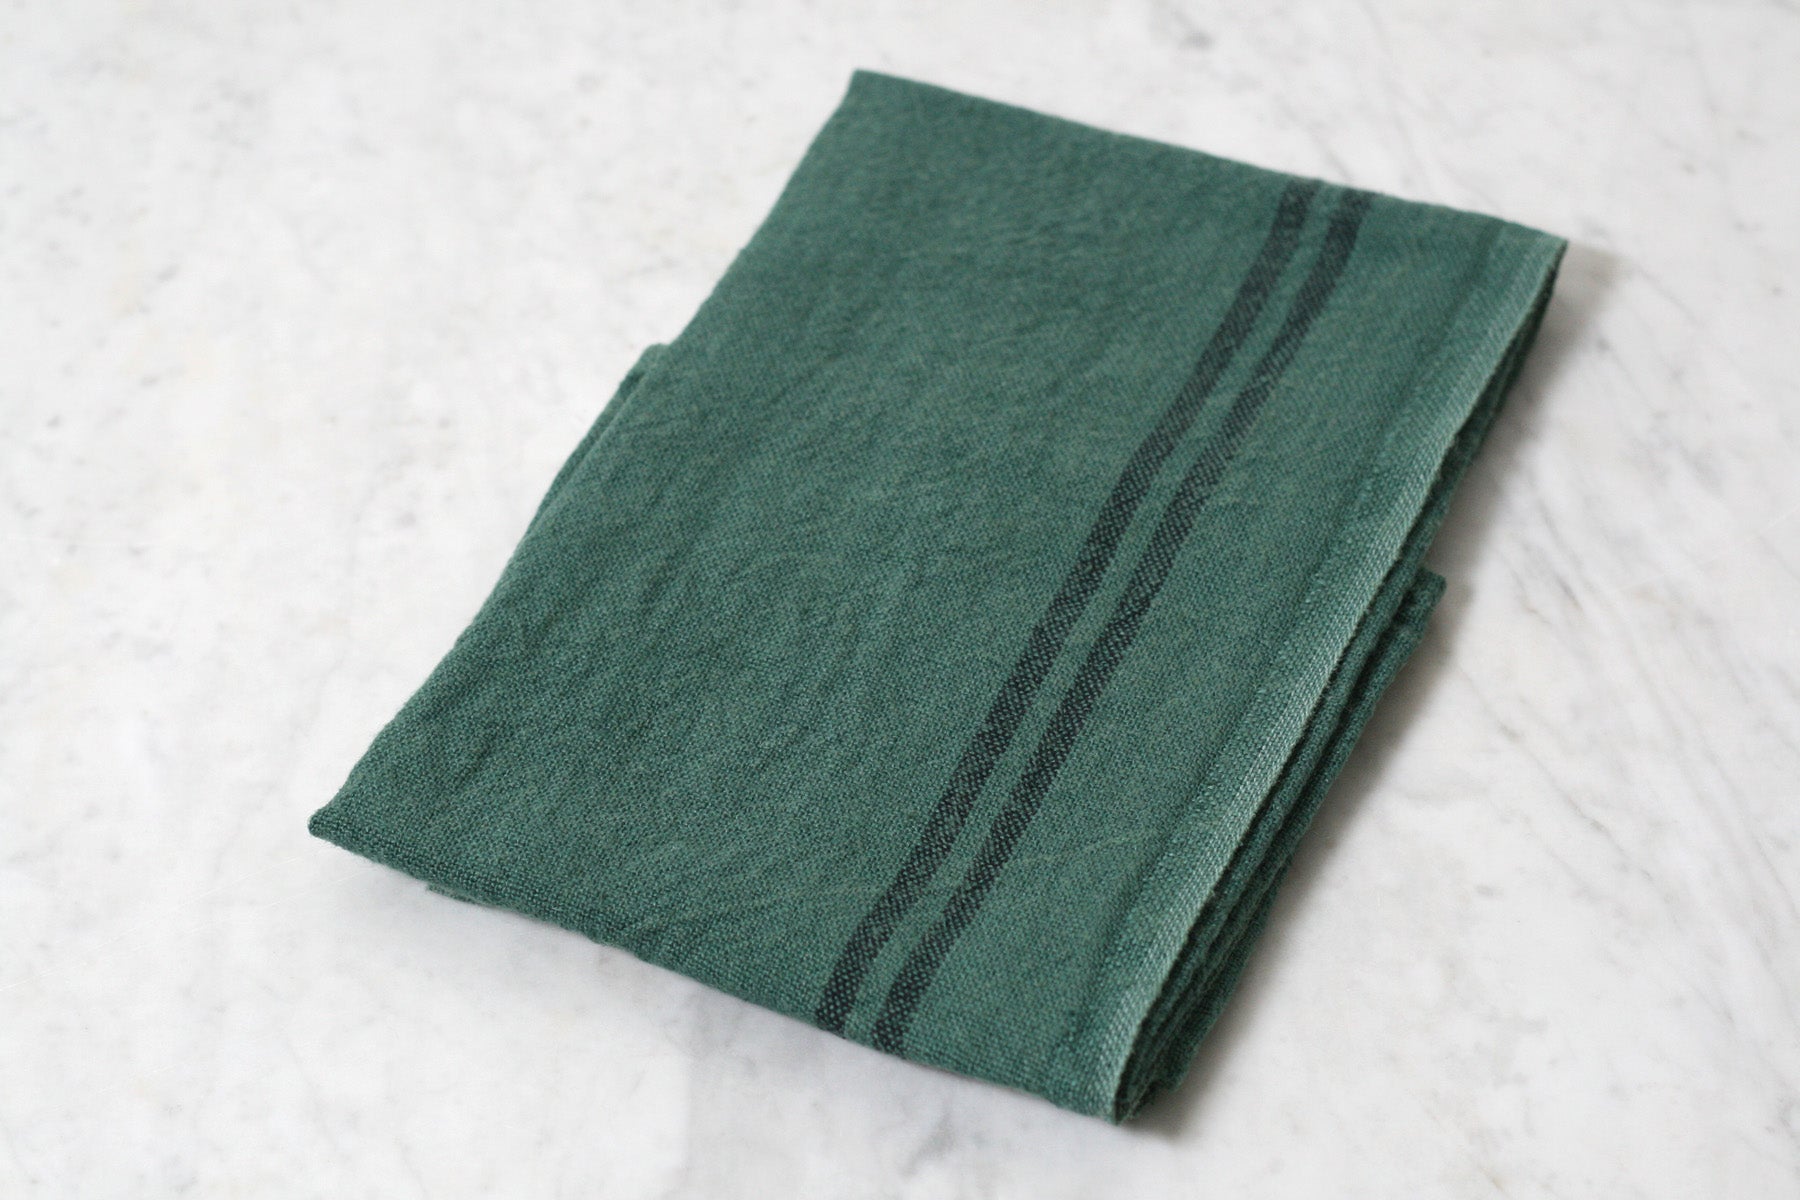 Striped Linen Dish Towel. Made in France